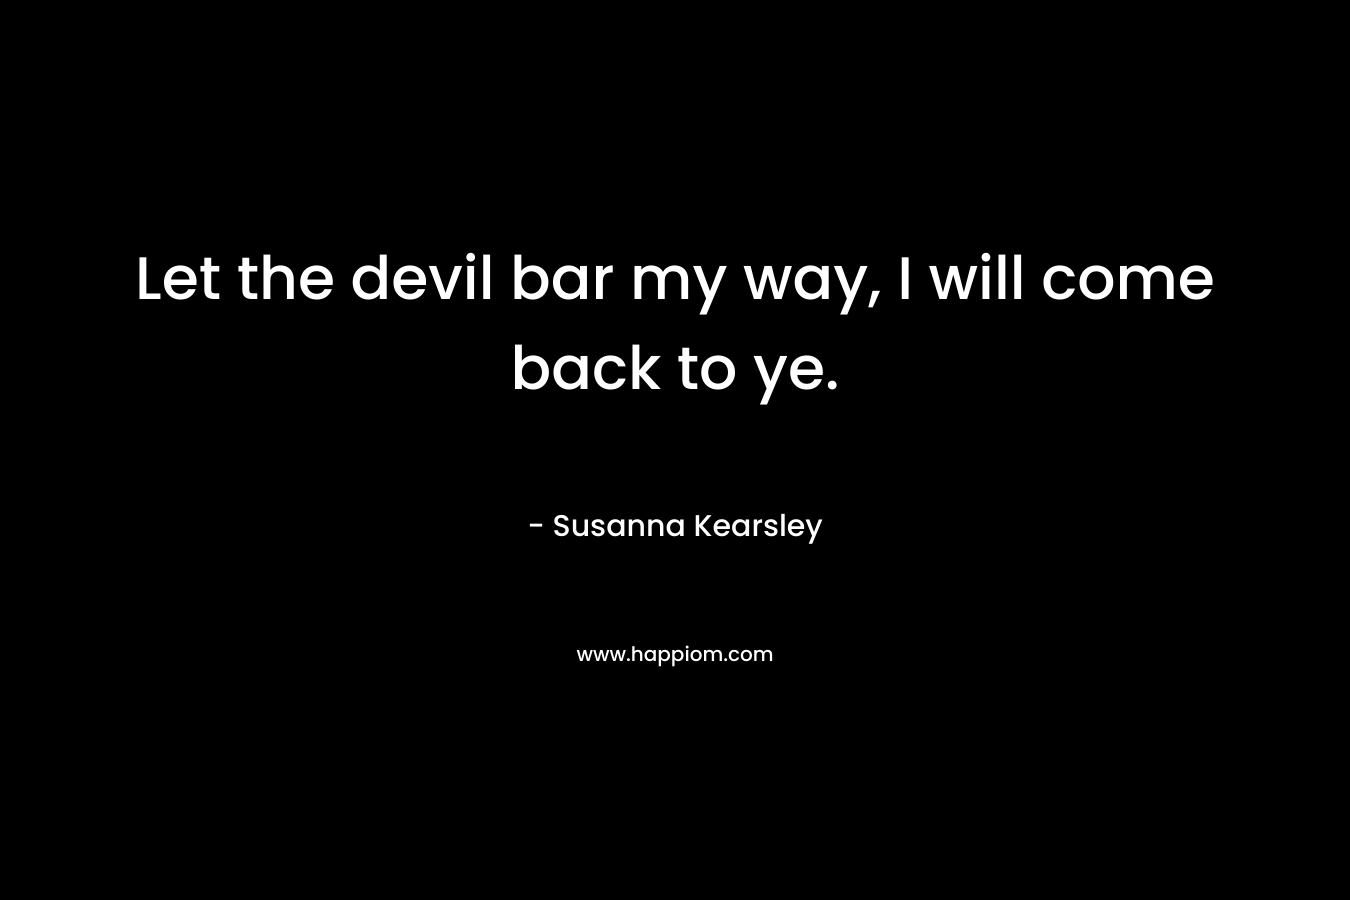 Let the devil bar my way, I will come back to ye.